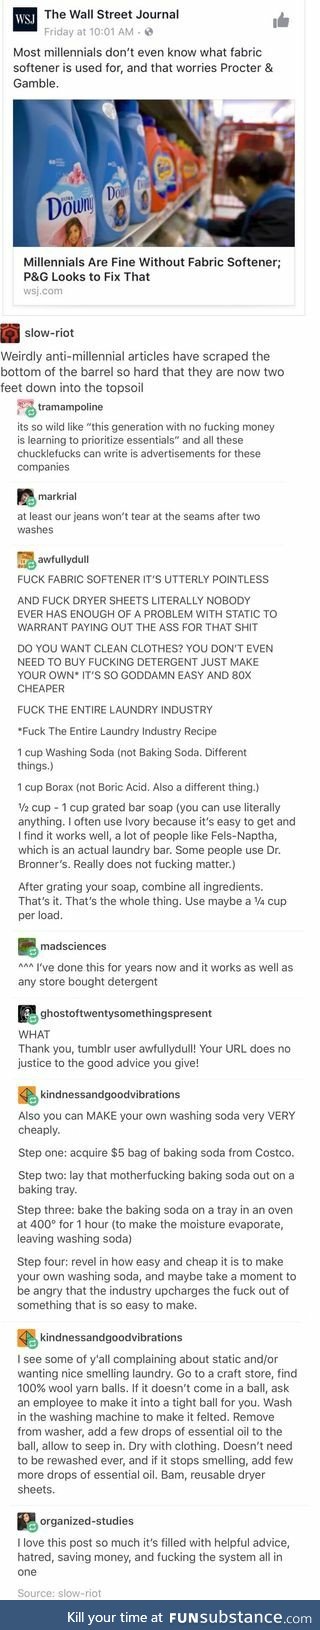 Laundry Soap for millenials